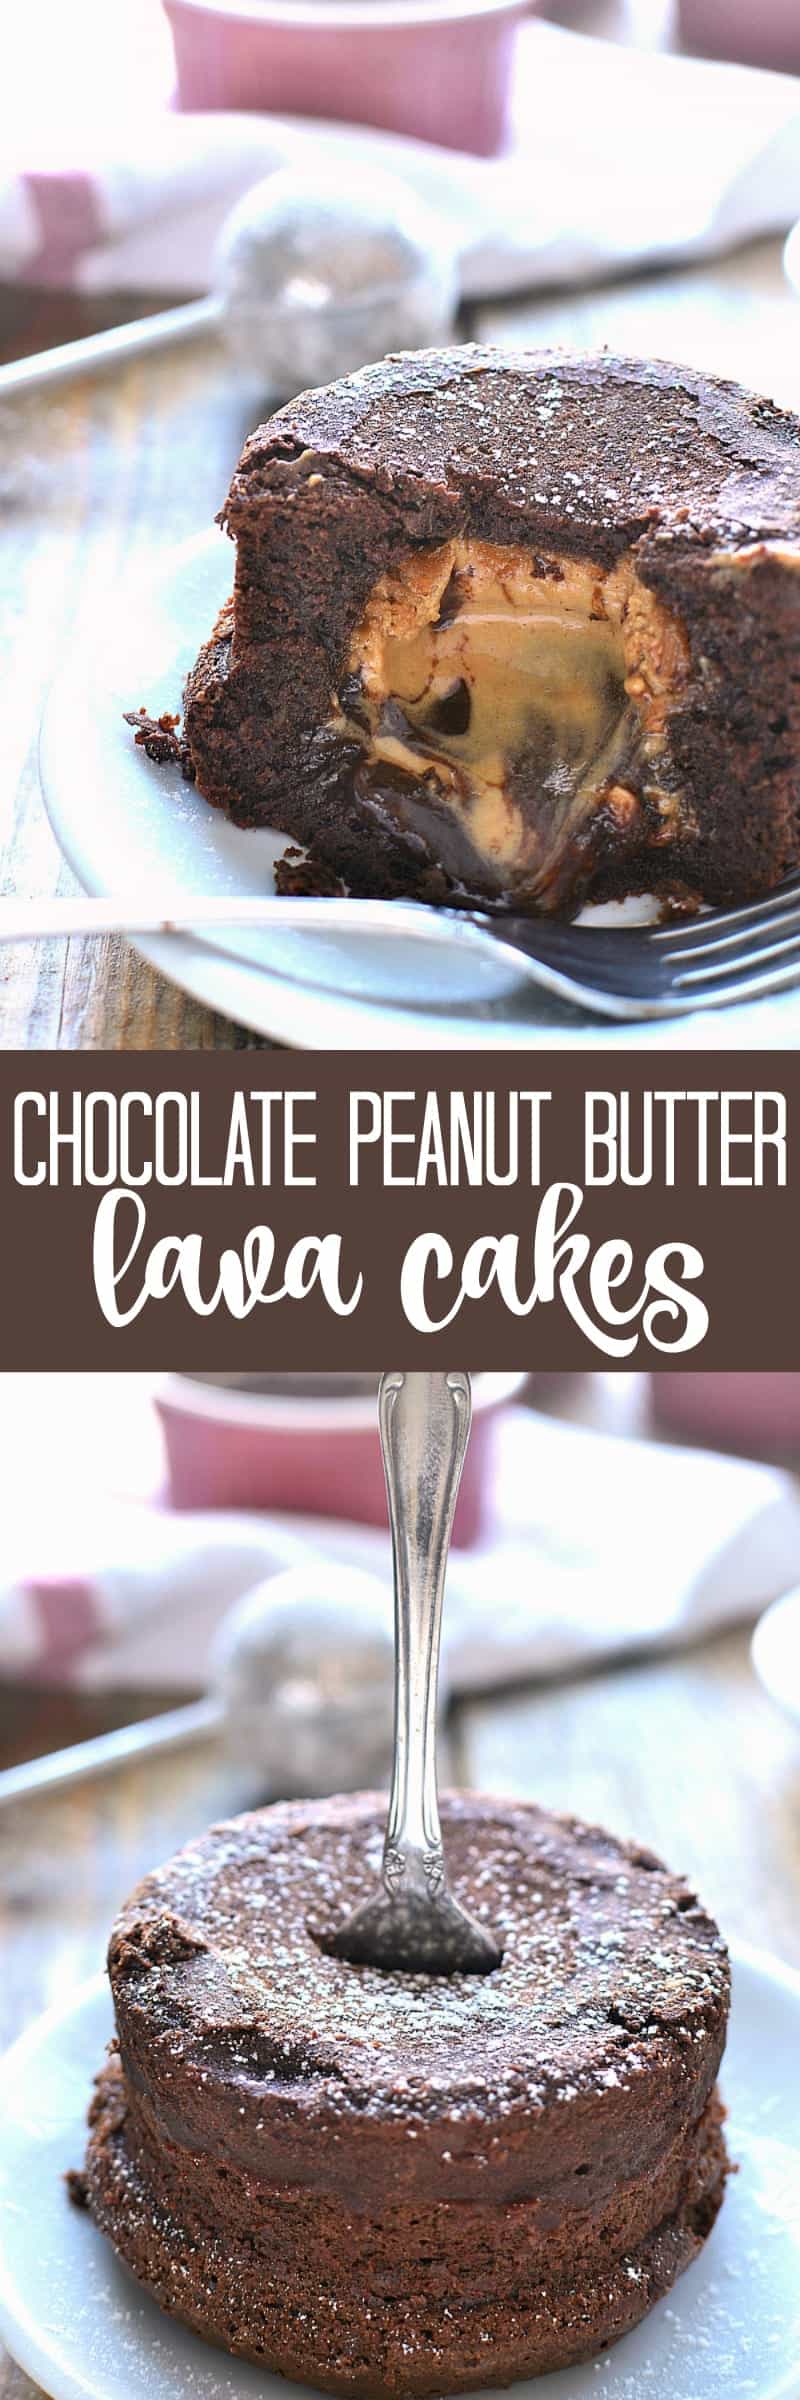 Chocolate Peanut Butter Lava Cakes combine two classic flavors in one deliciously ooey gooey dessert. Perfect for Valentine's Day or any special occasion!